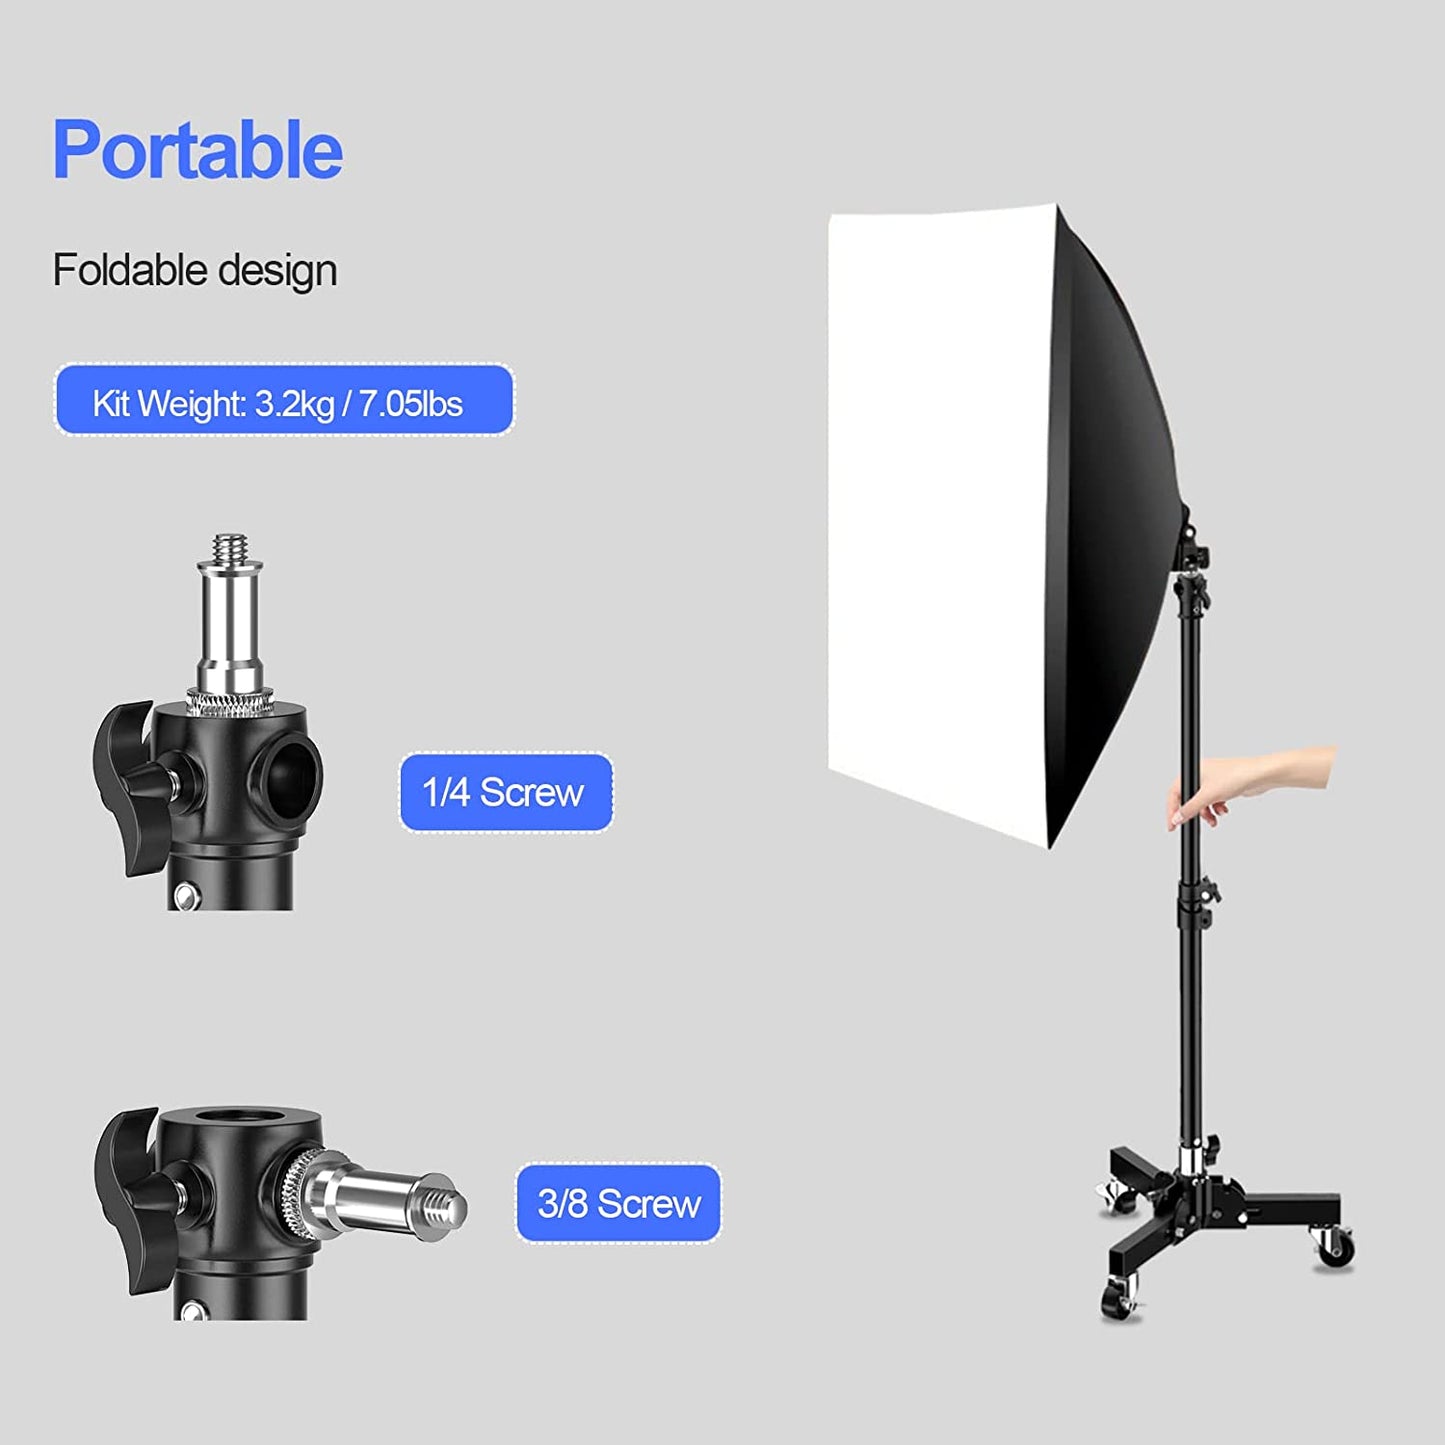 Photography Photo Studio 30 inch Mini Tripod Light Stand Base with Casters - EMART INTERNATIONAL, INC (Official Website)